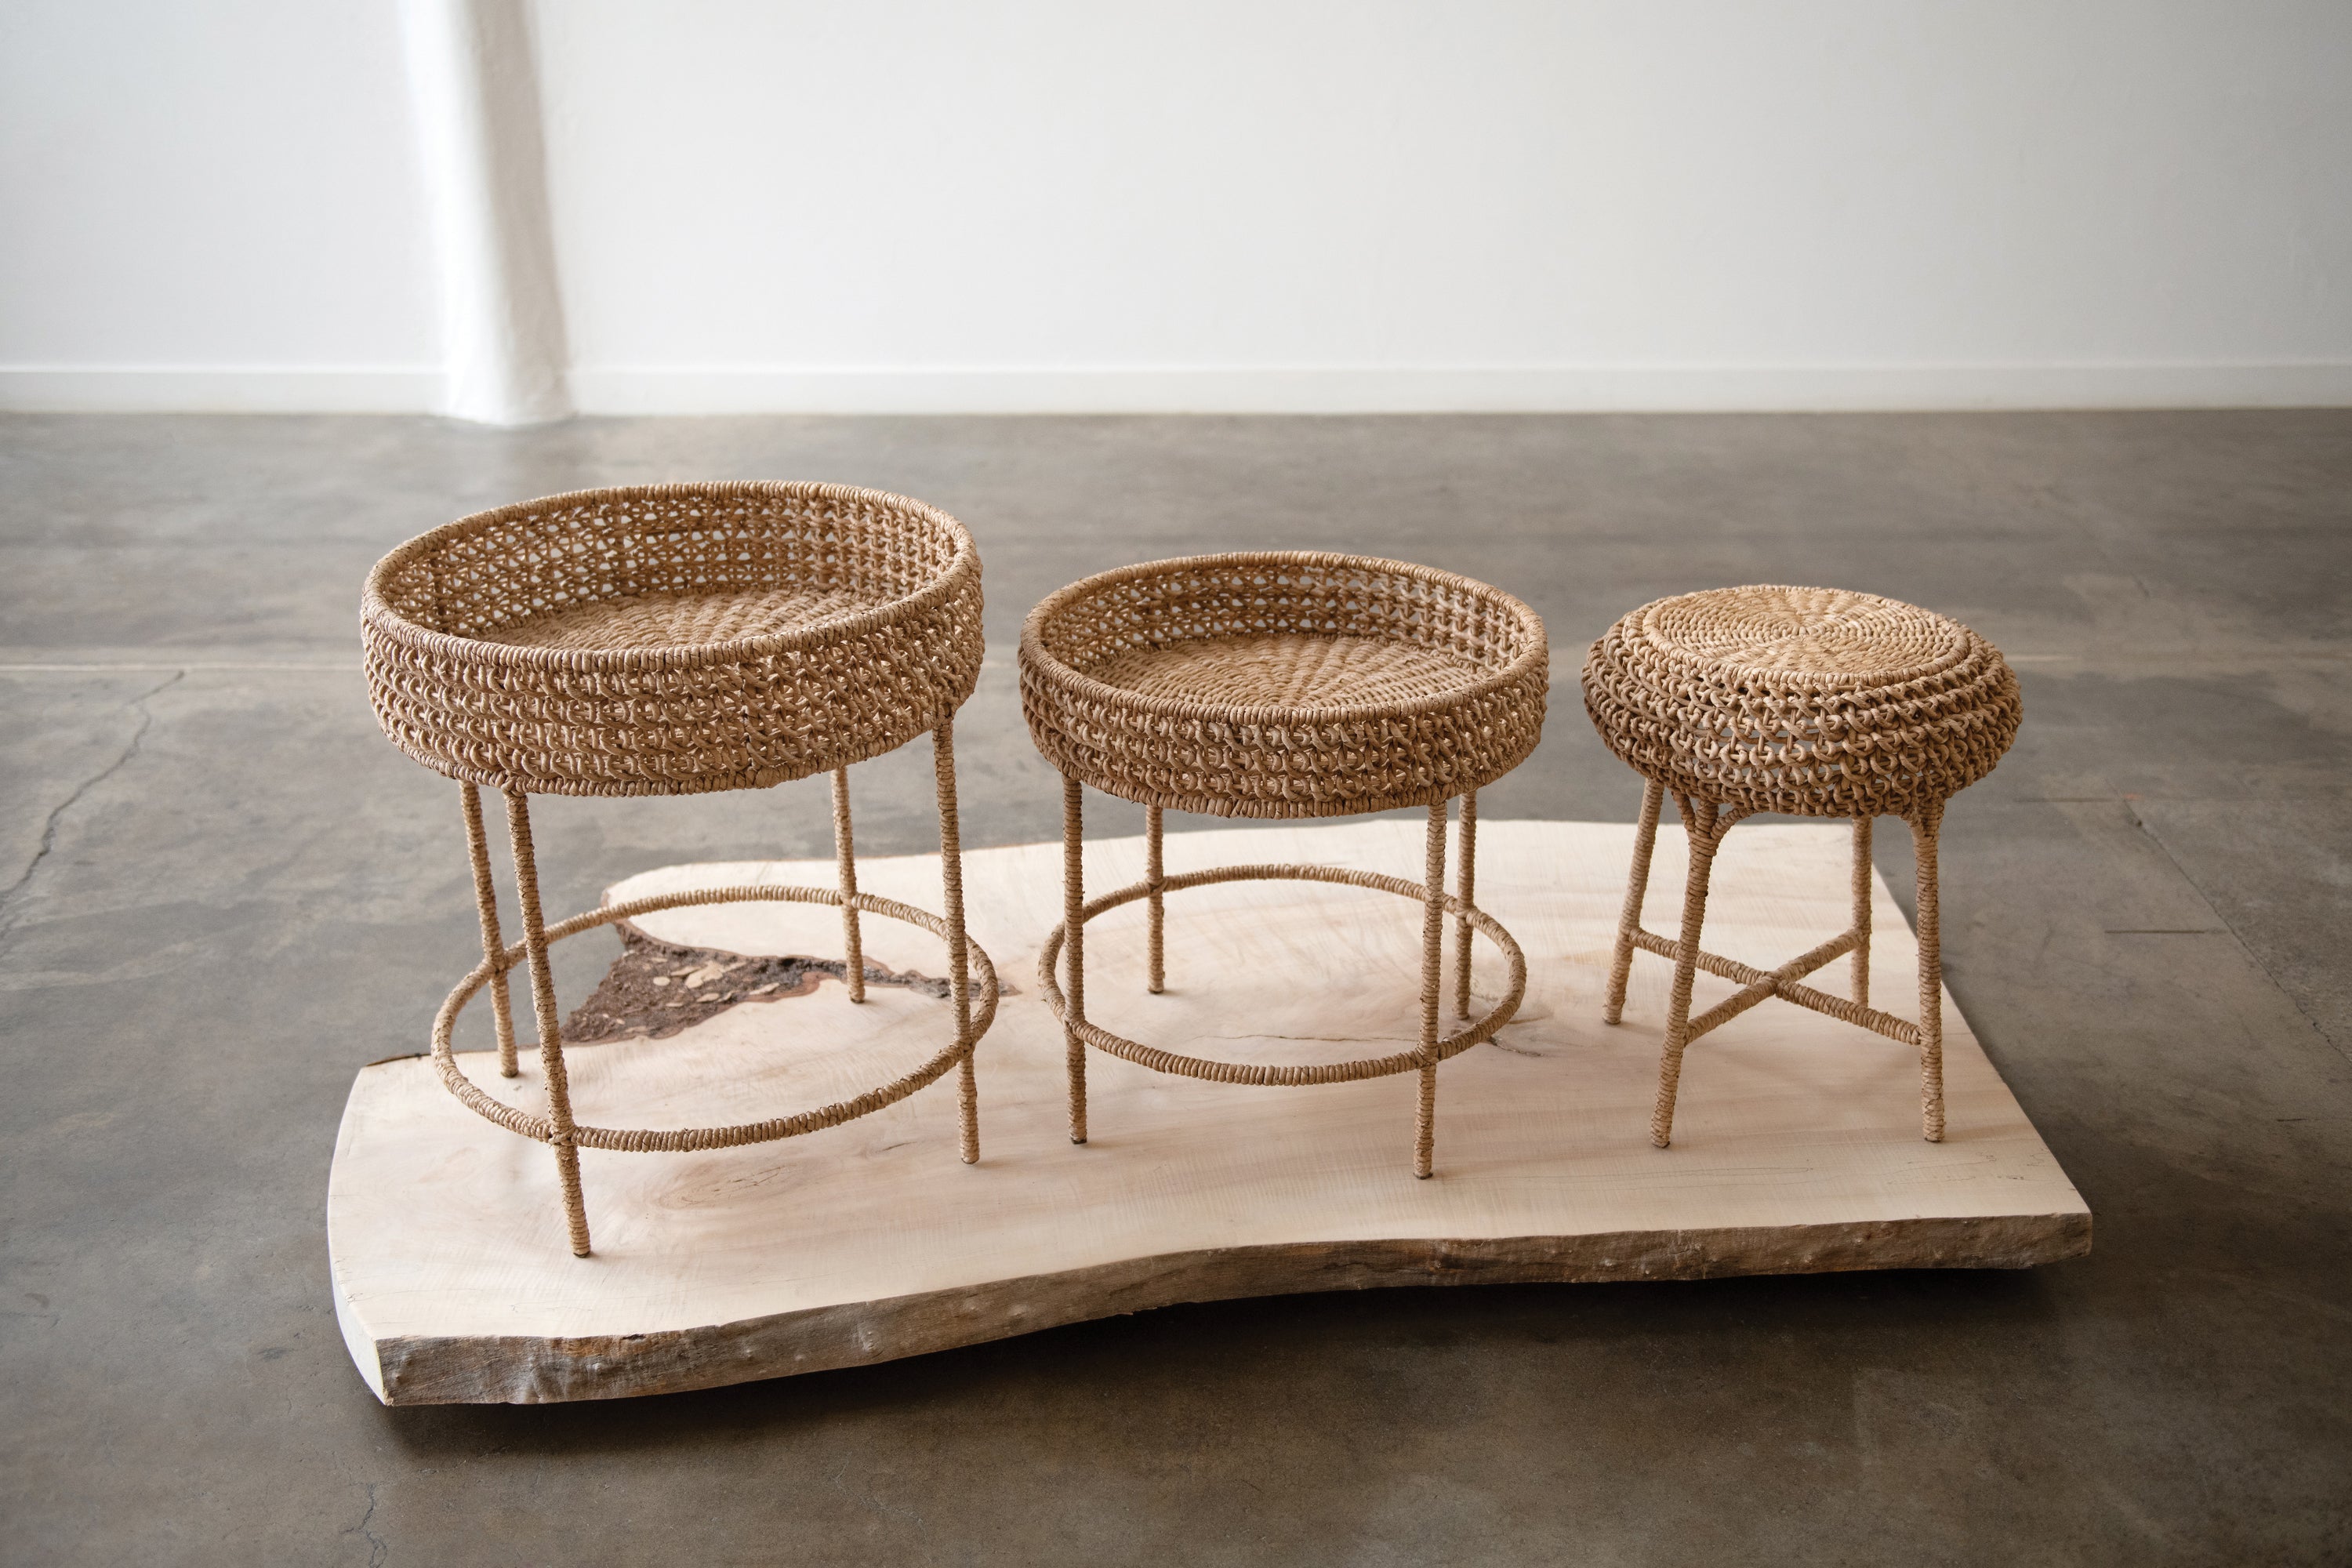 Woven Water Hyacinth & Rattan Accent Tables  (Set of 3 Sizes/Styles)